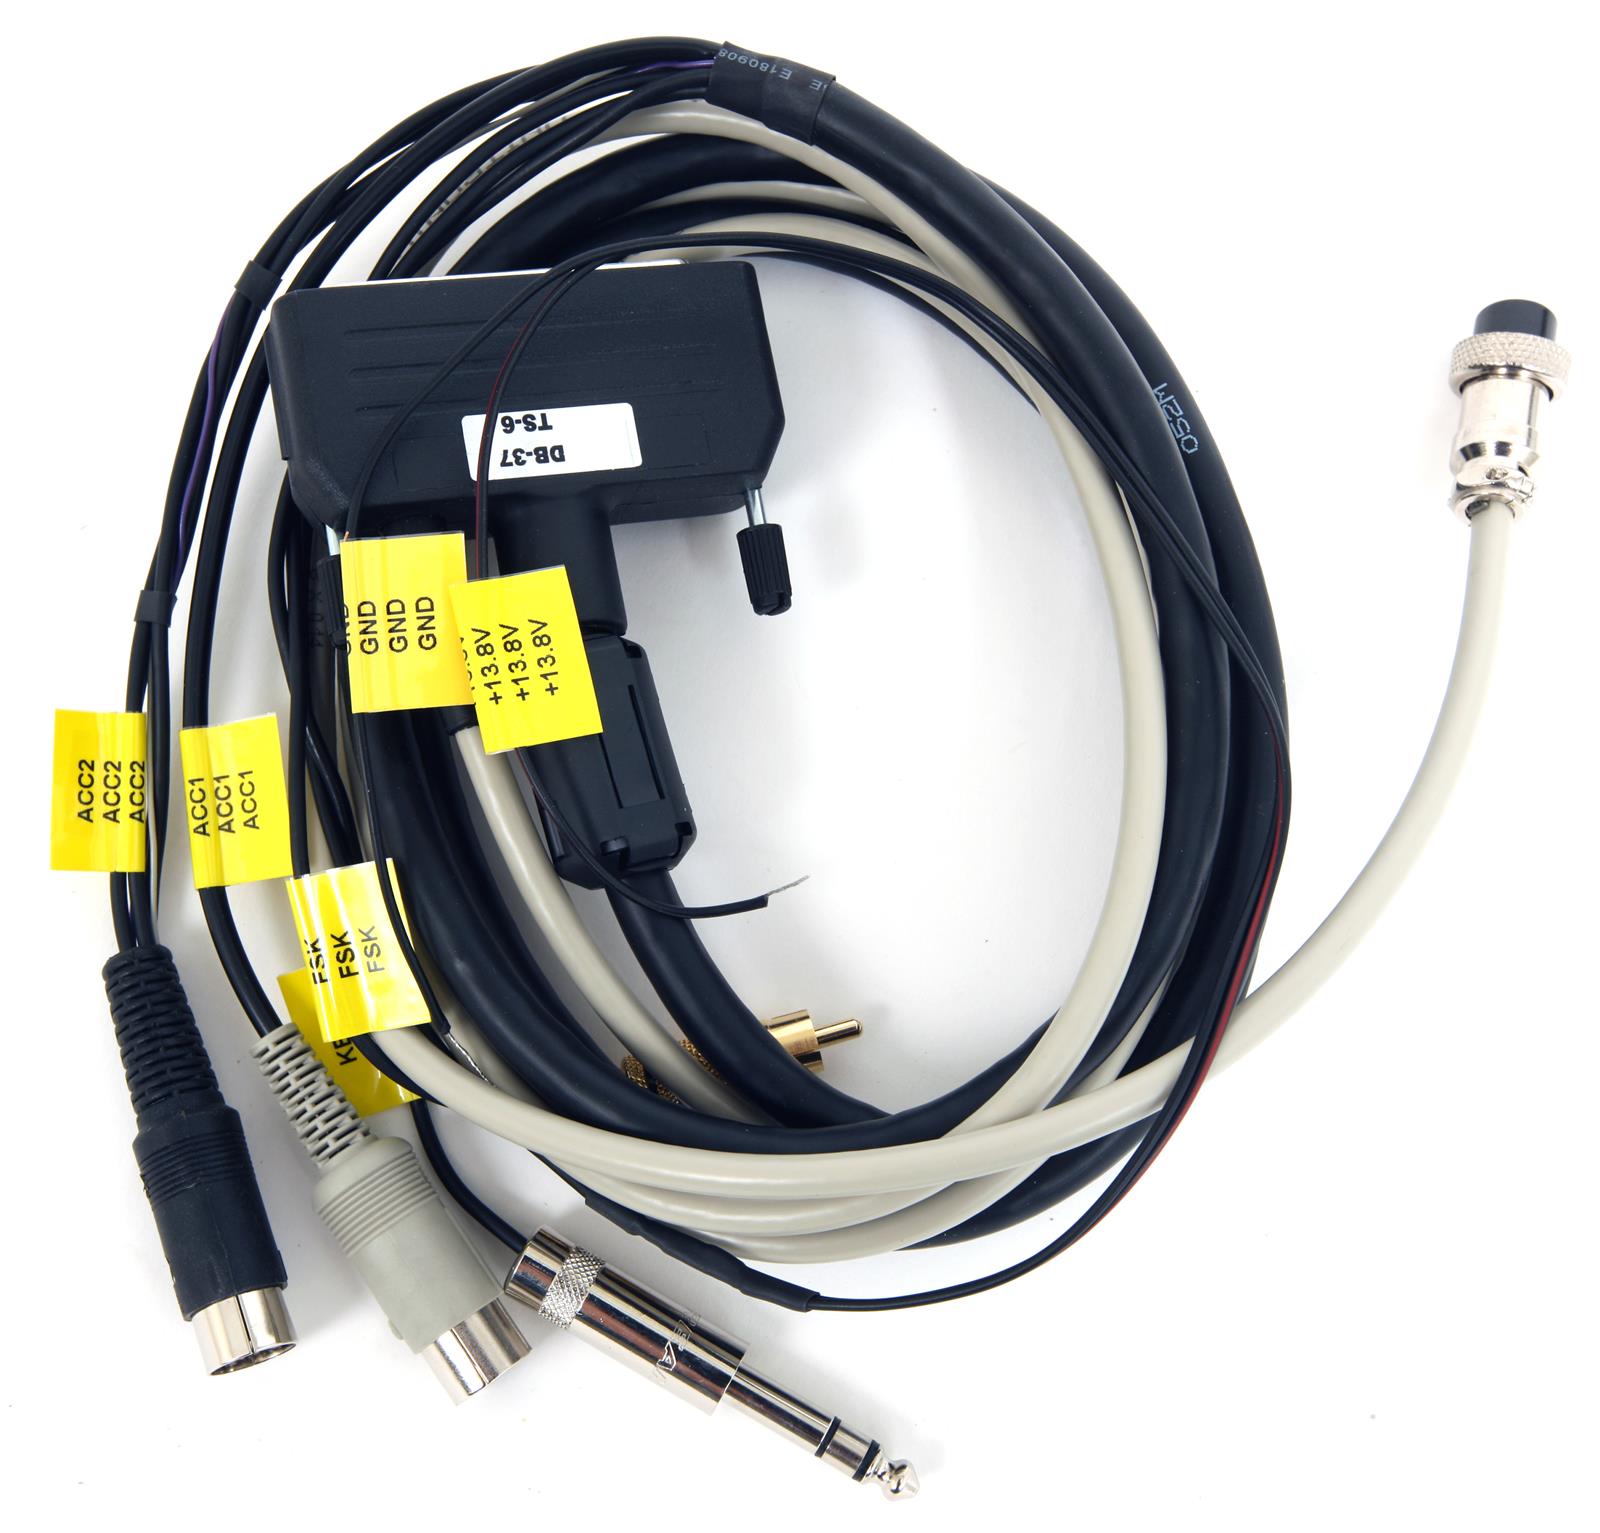 microHAM Radio Interface Cables | DX Engineering